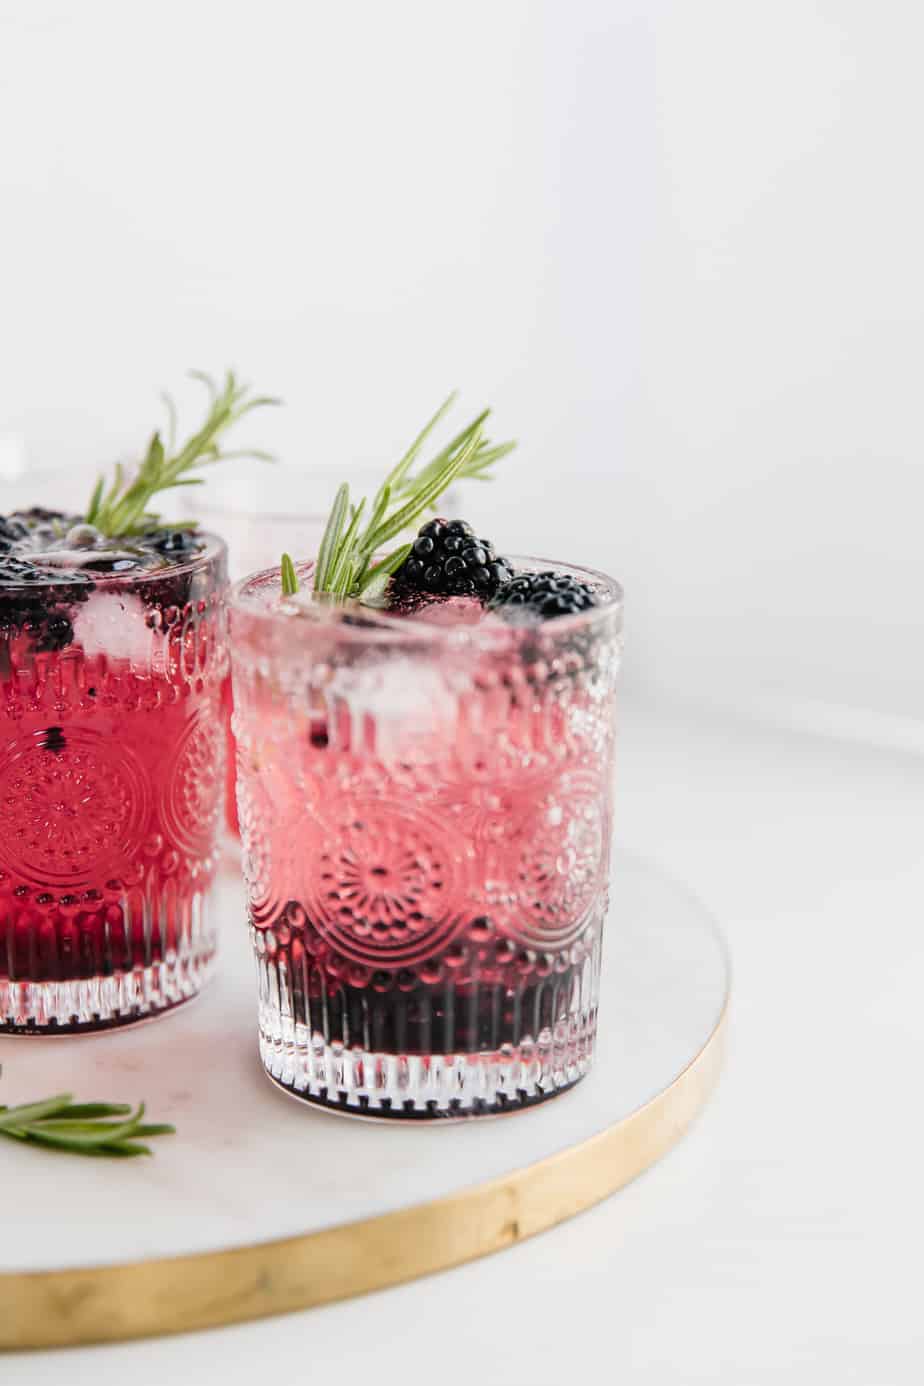 A blackberry gin and tonic with fresh berries and rosemary.